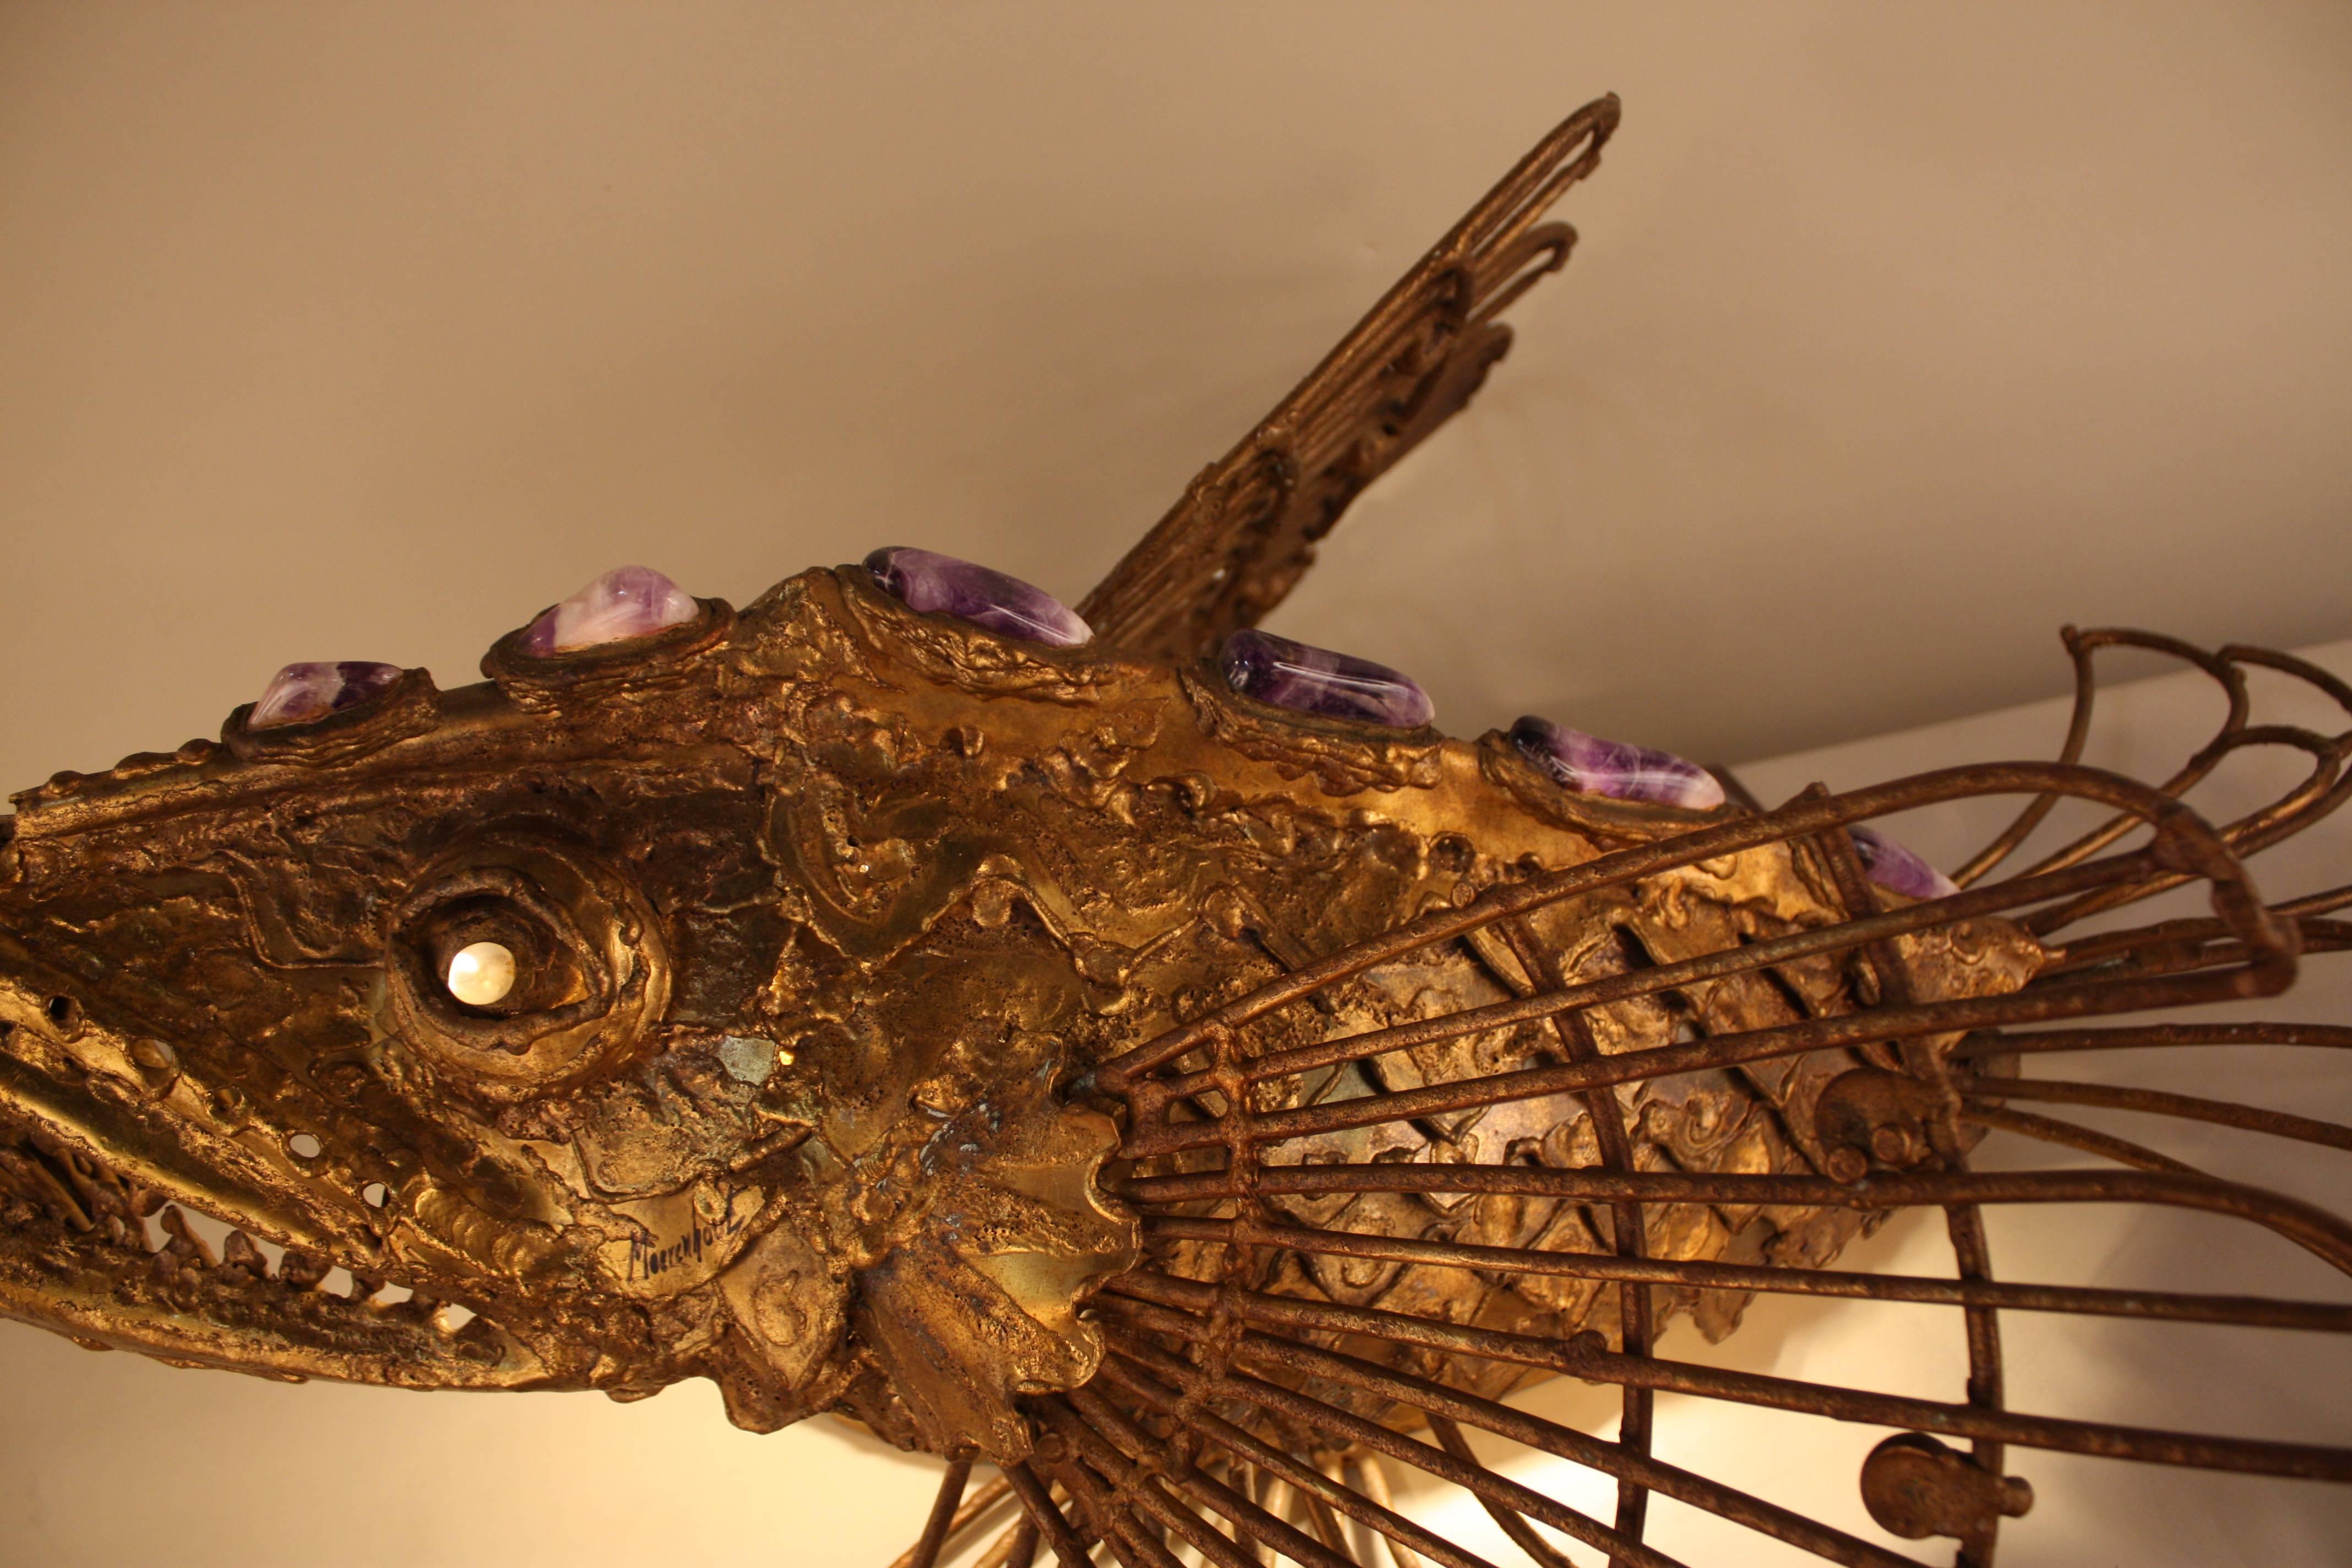 Wild fish design bronze sculpture with amethyst rock that can be used as a table lamp or wall sconce. by Paul Moerenhout.
Measurement is done as a table lamp.